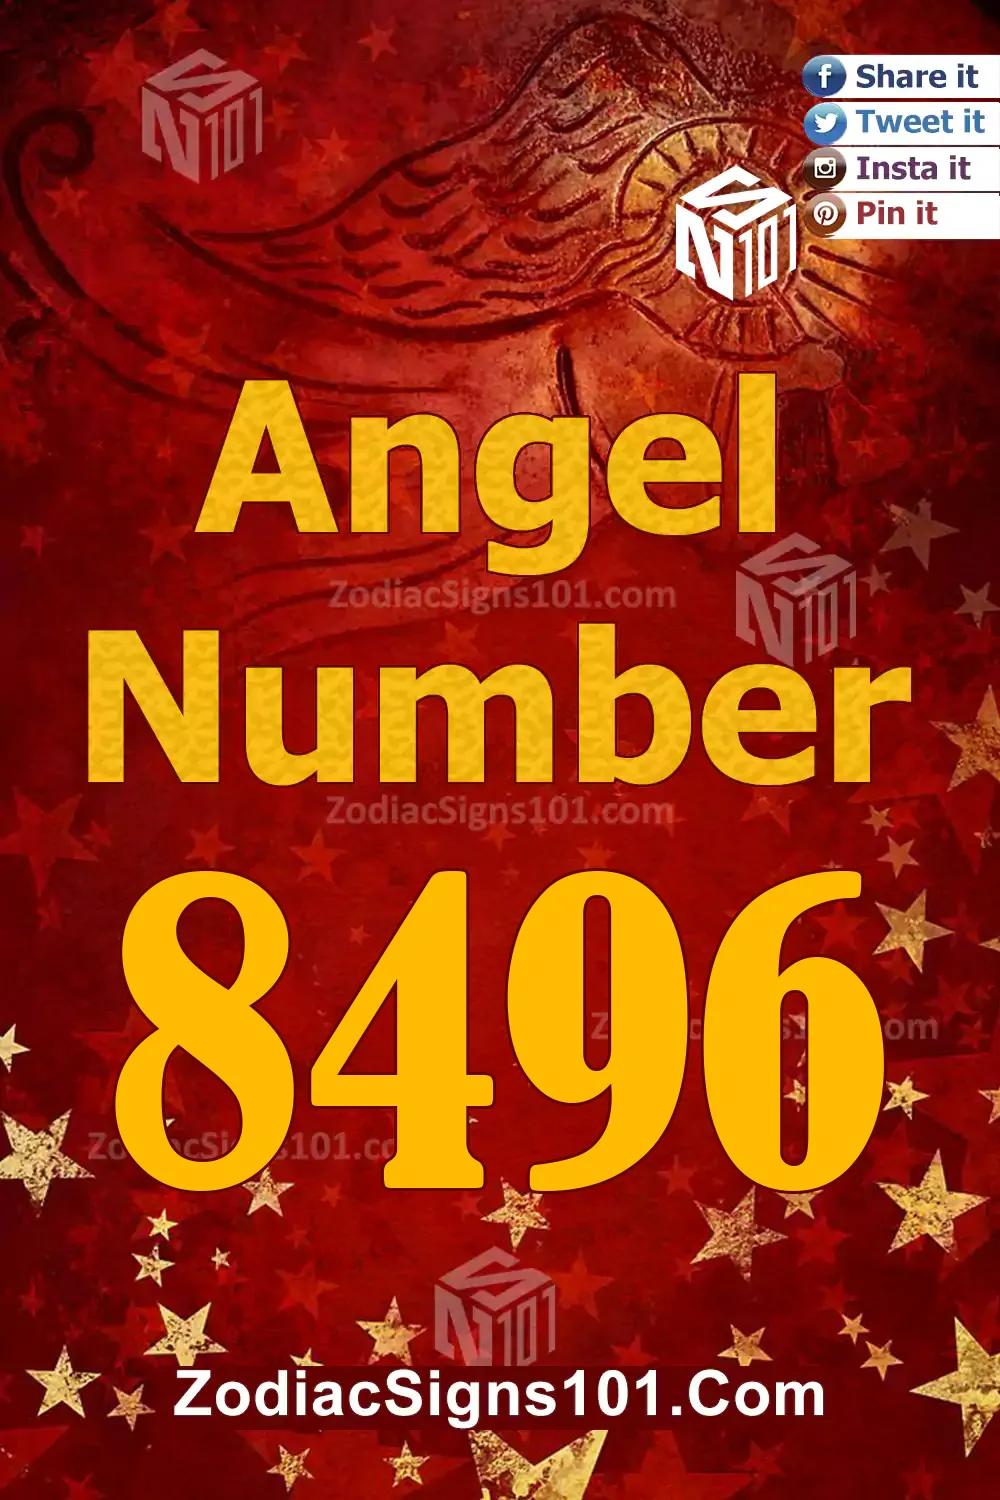 8496 Angel Number Meaning